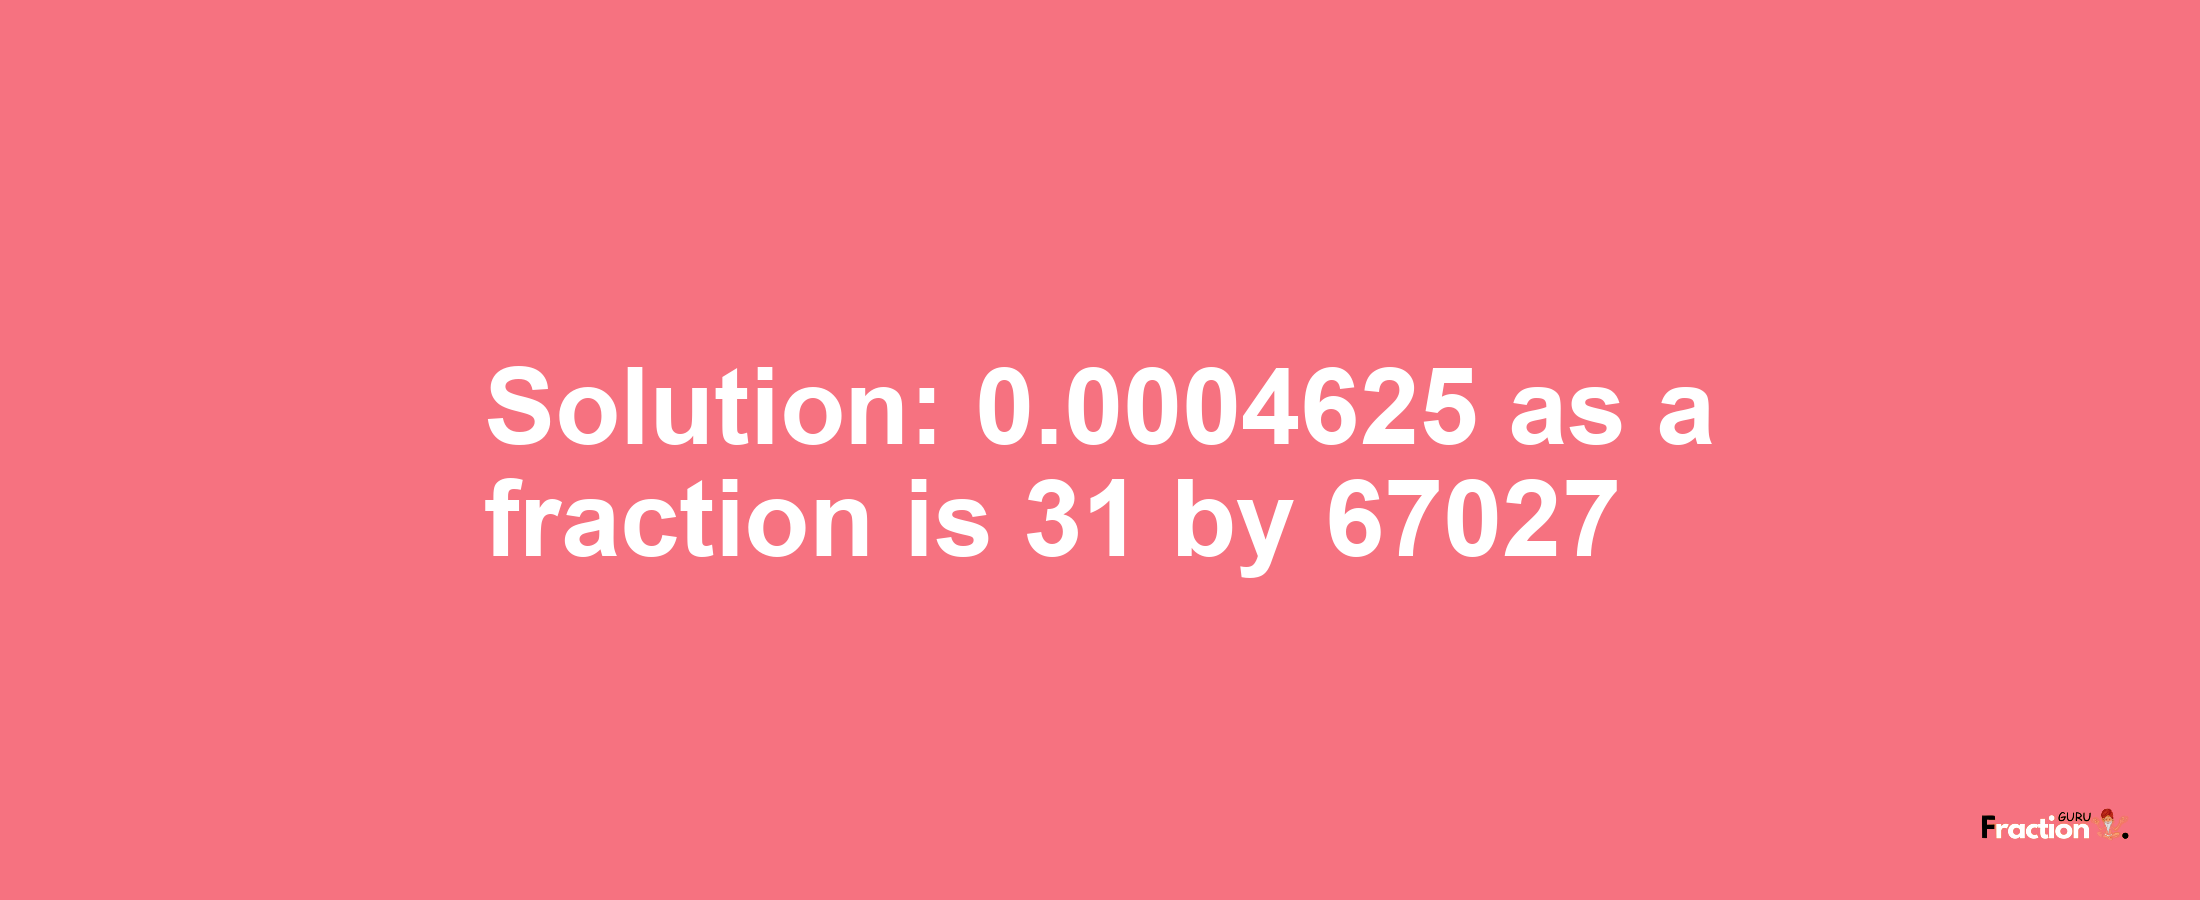 Solution:0.0004625 as a fraction is 31/67027